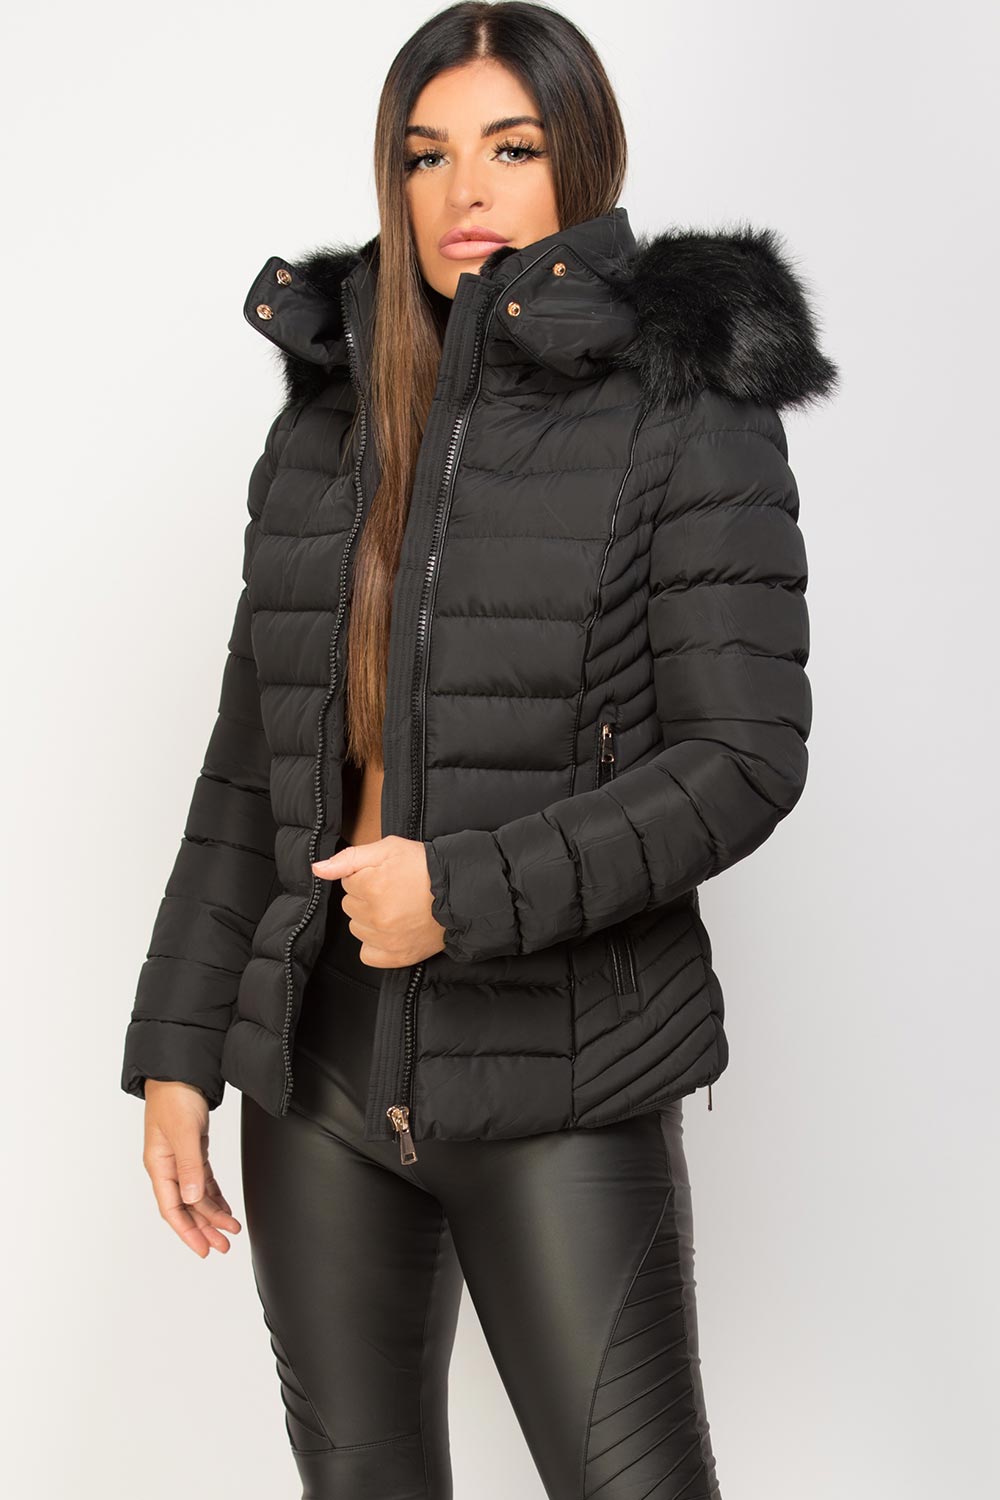 Black Puffer Jacket With Faux fur Hood 